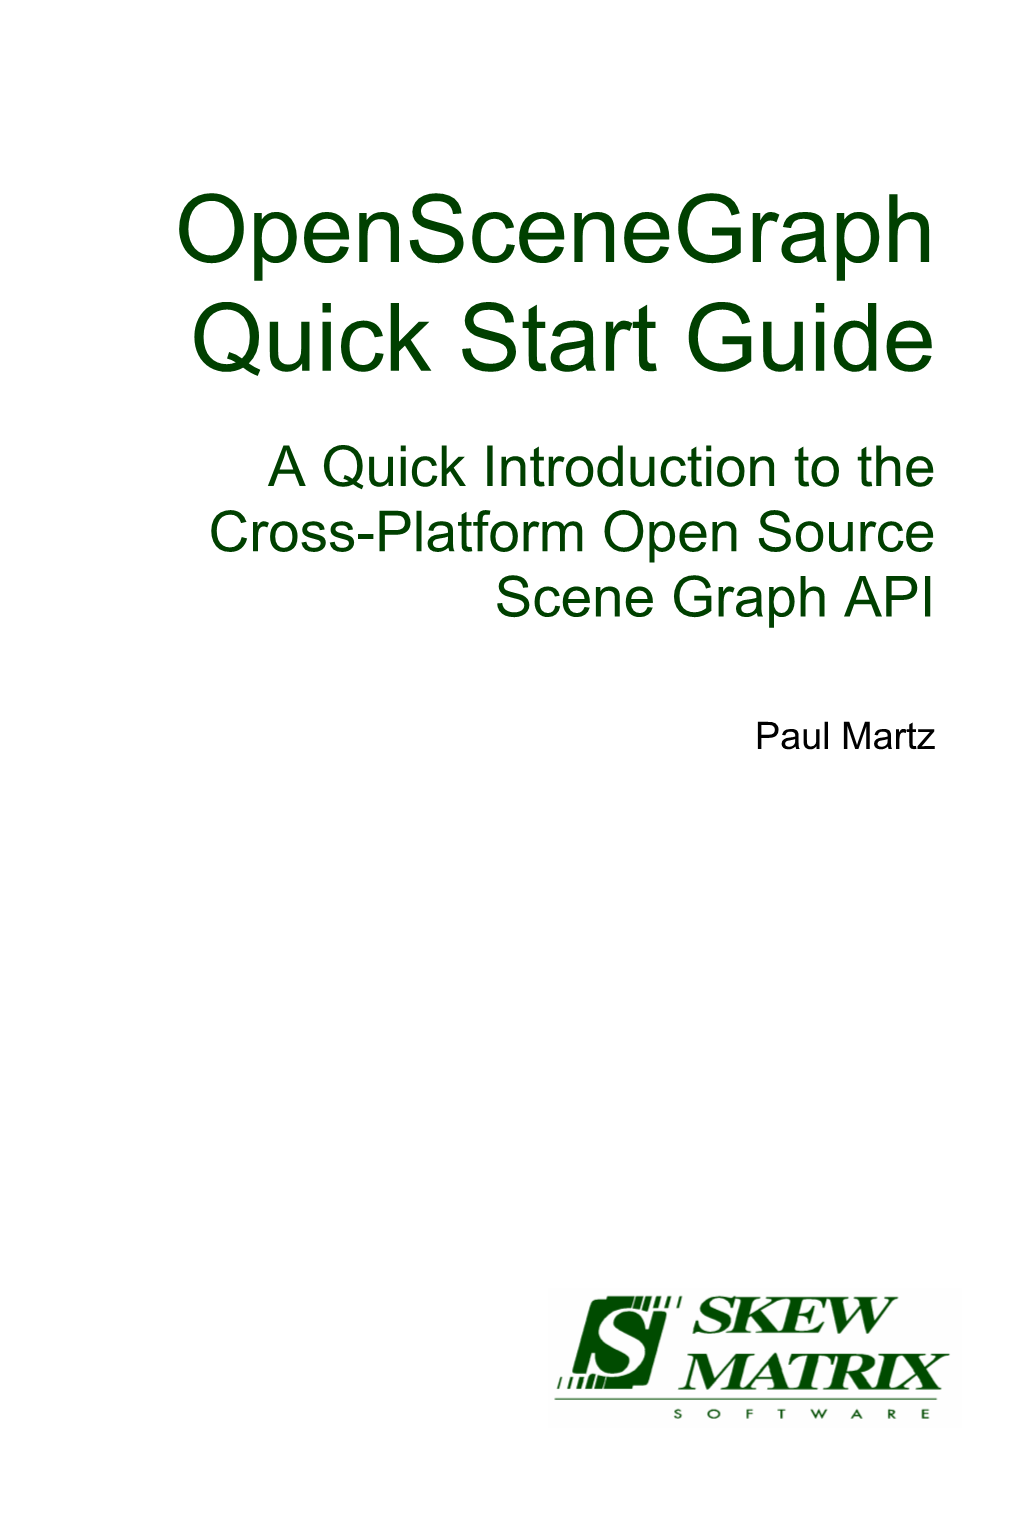 Openscenegraph Quick Start Guide a Quick Introduction to the Cross-Platform Open Source Scene Graph API